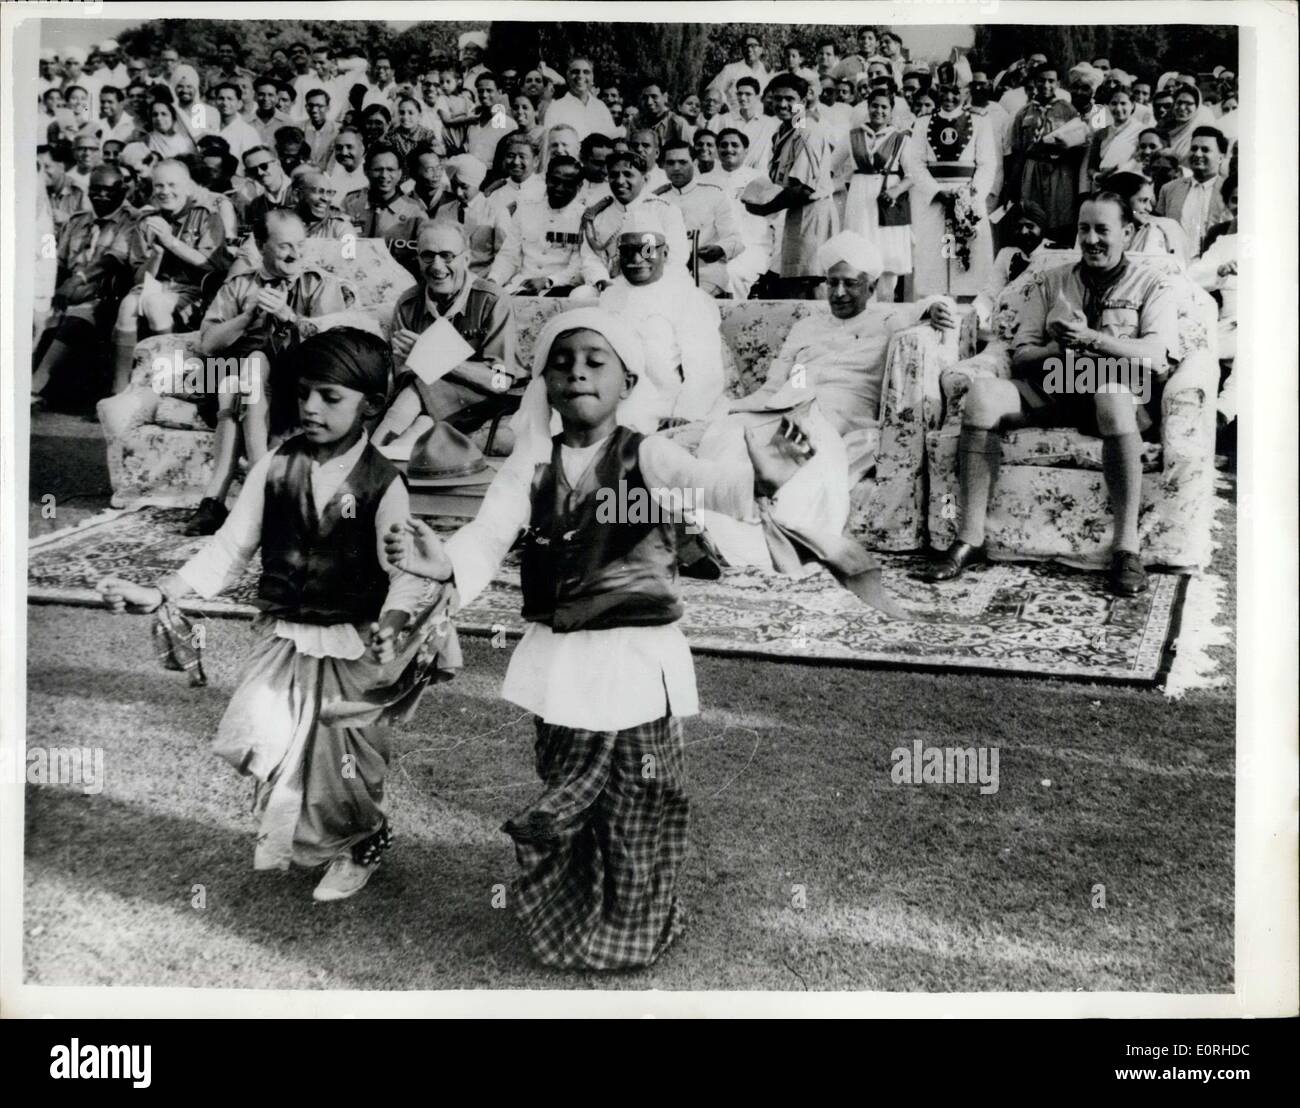 Aug. 05, 1959 - Seventeenth International Scout Conference In New Delhi: Lord Rowallan the Chief Scout of the British Commonwealth - the President Of India - and other personalities - a plaud Punjab I Bhangra Dancers at the Delhi State Bharst Scouts and Guides Rally at Rashtrapati Bhavan in New Delhi - part of the Seventeenth International Scout Conference now being held there. Stock Photo